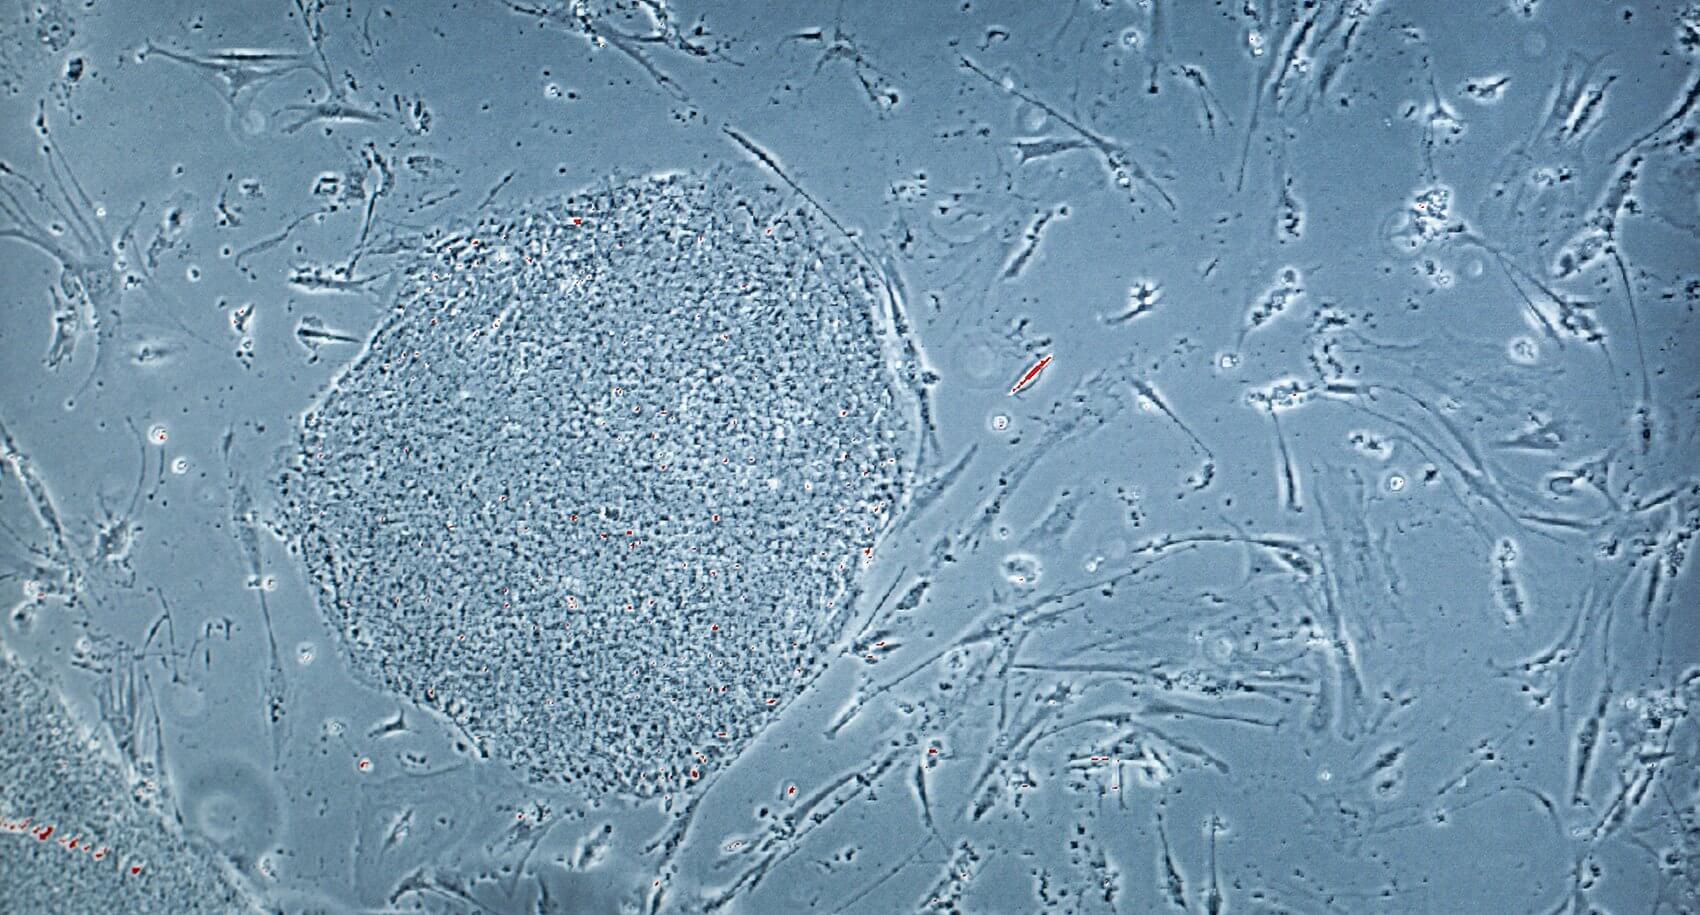 Induced pluripotent stem cells (iPSCs) from a healthy patient.